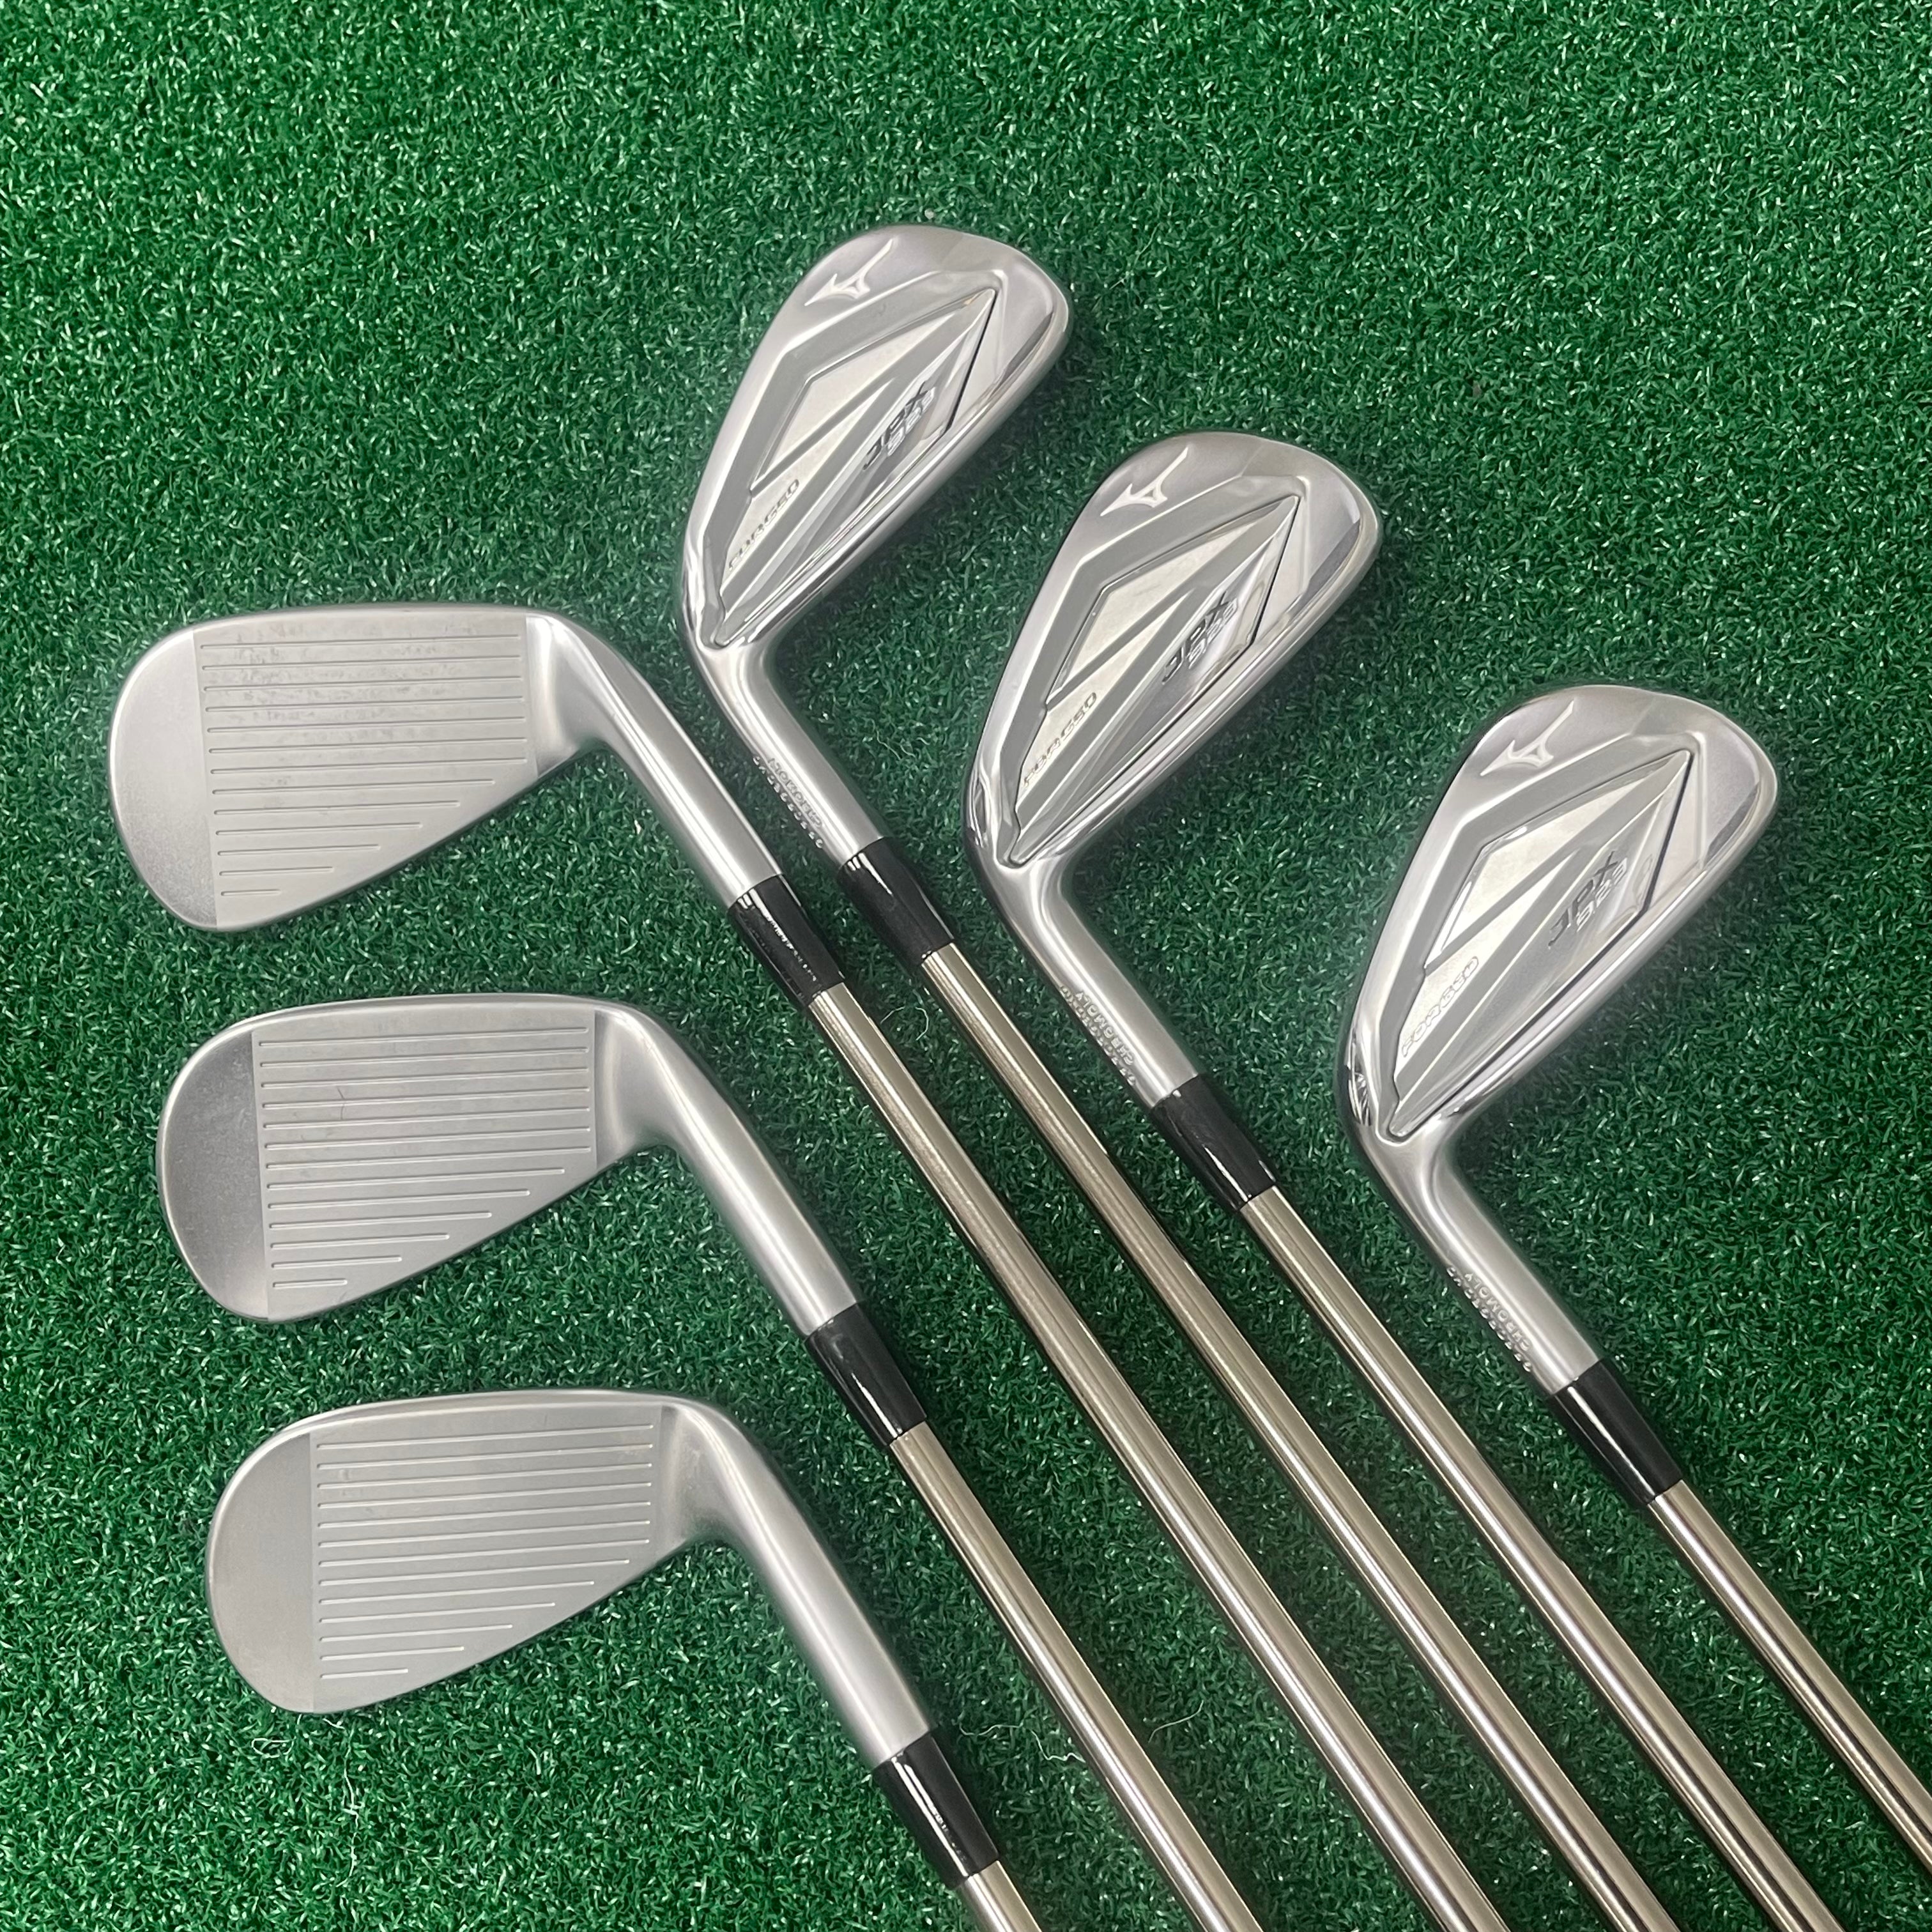 LEFT HAND MIZUNO JPX 923 FORGED IRONS / 5-PW / UST RECOIL ESX 460 F2 SENIOR SHAFTS